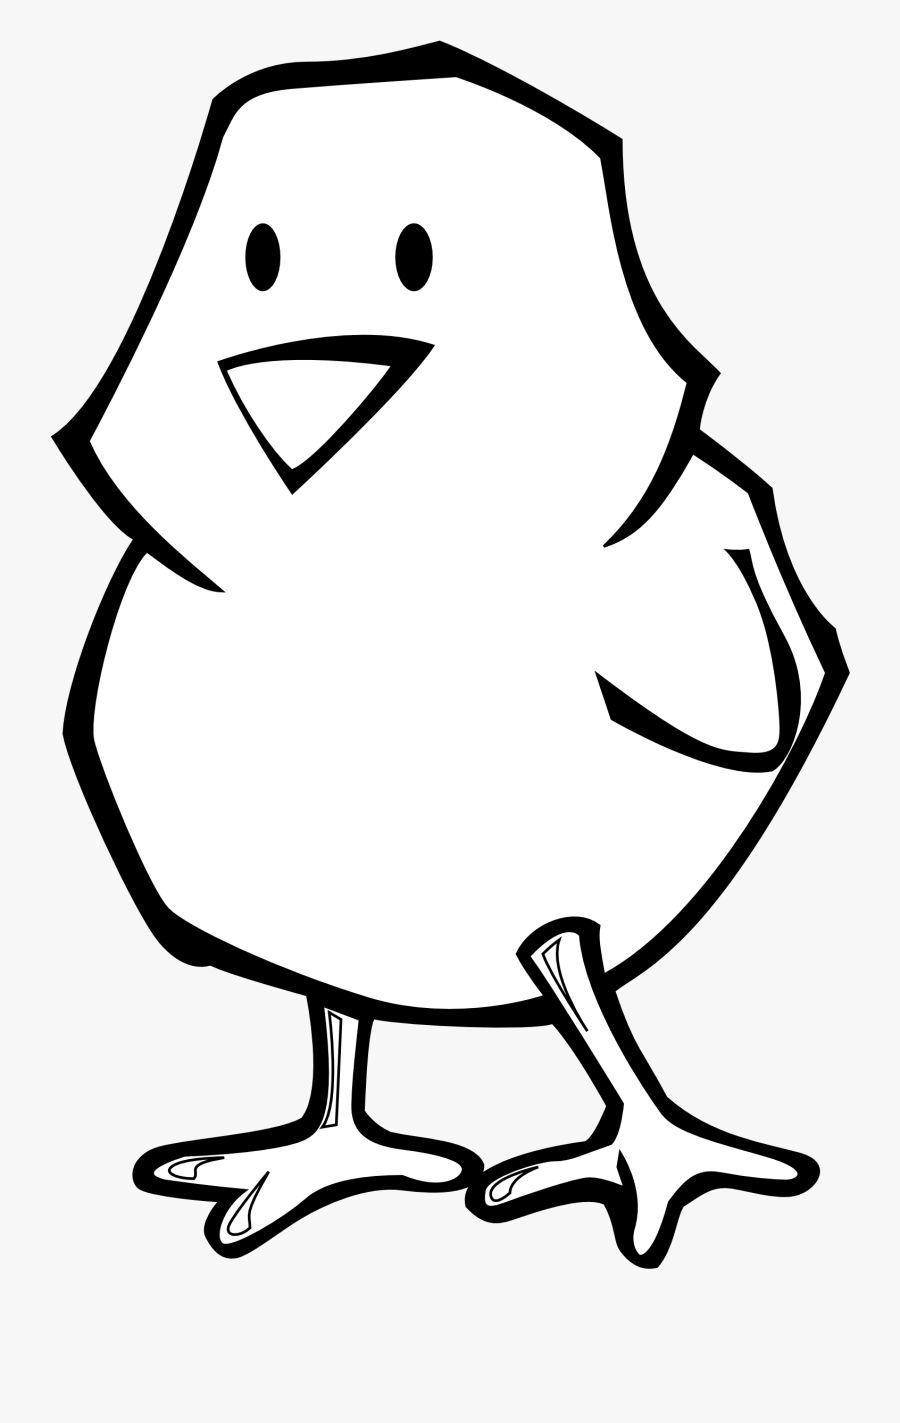 Thumb Image - Clipart Chicks Black And White, Transparent Clipart